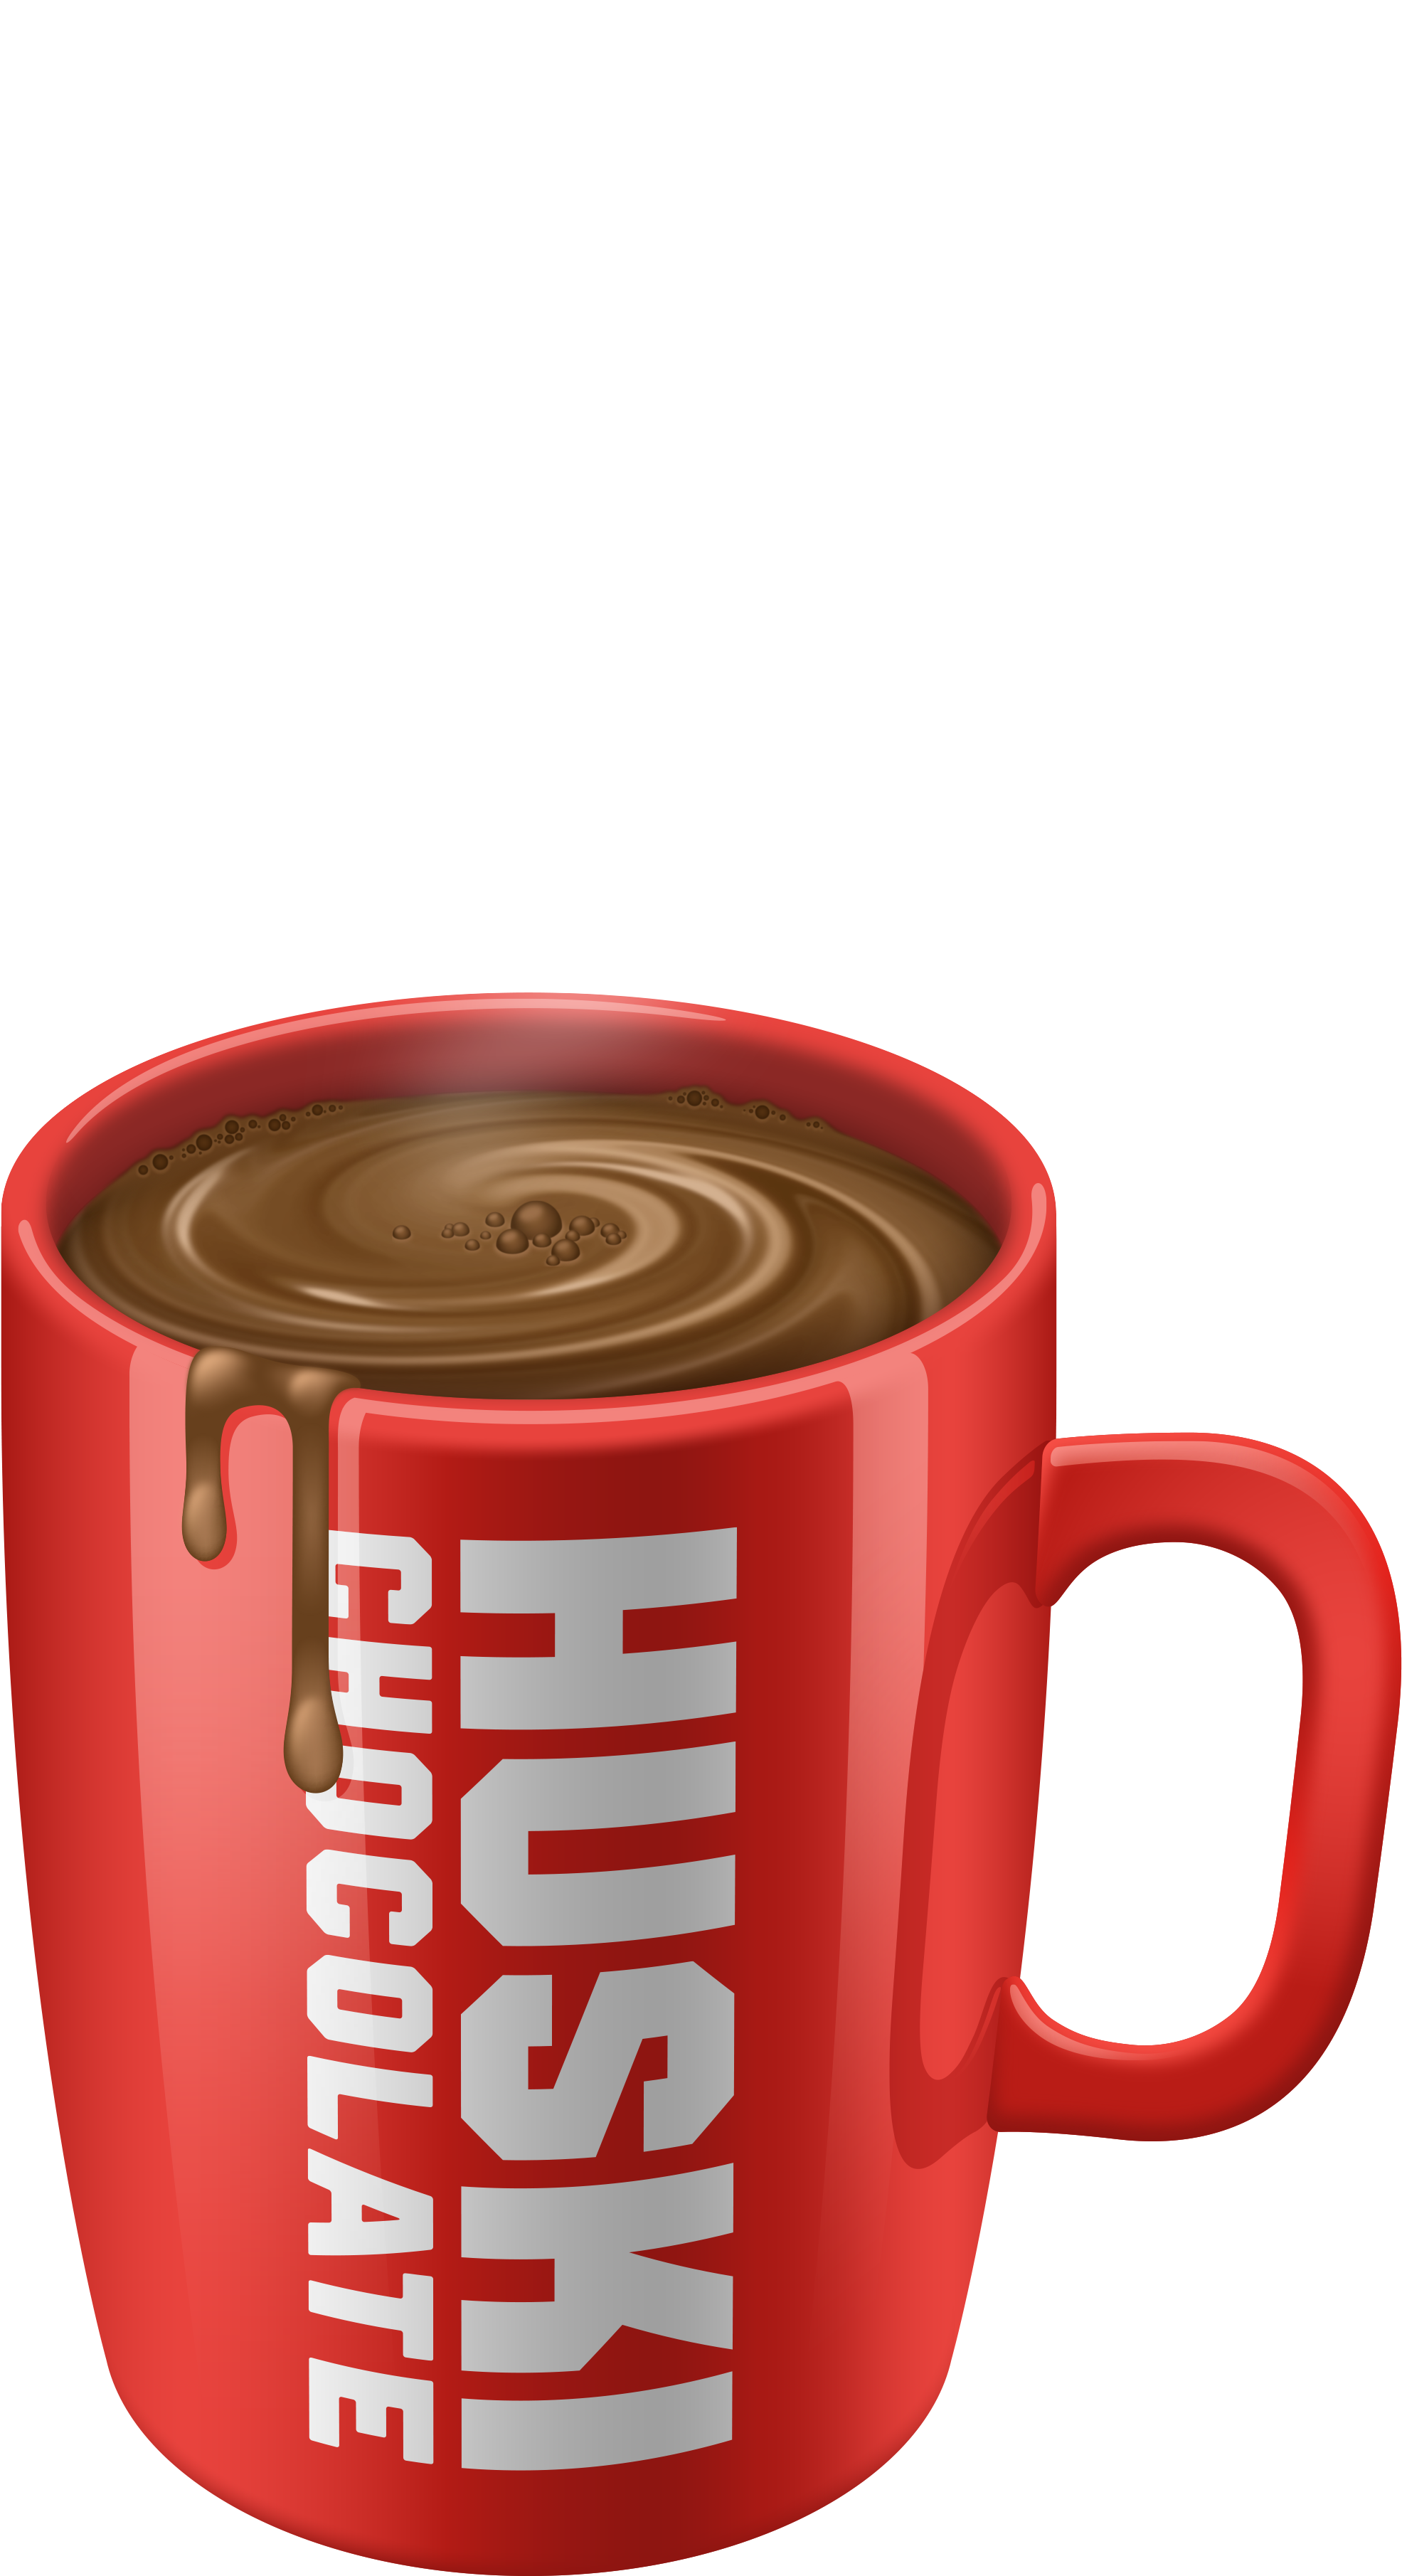 Coffee Chocolate Cup PNG Image Background